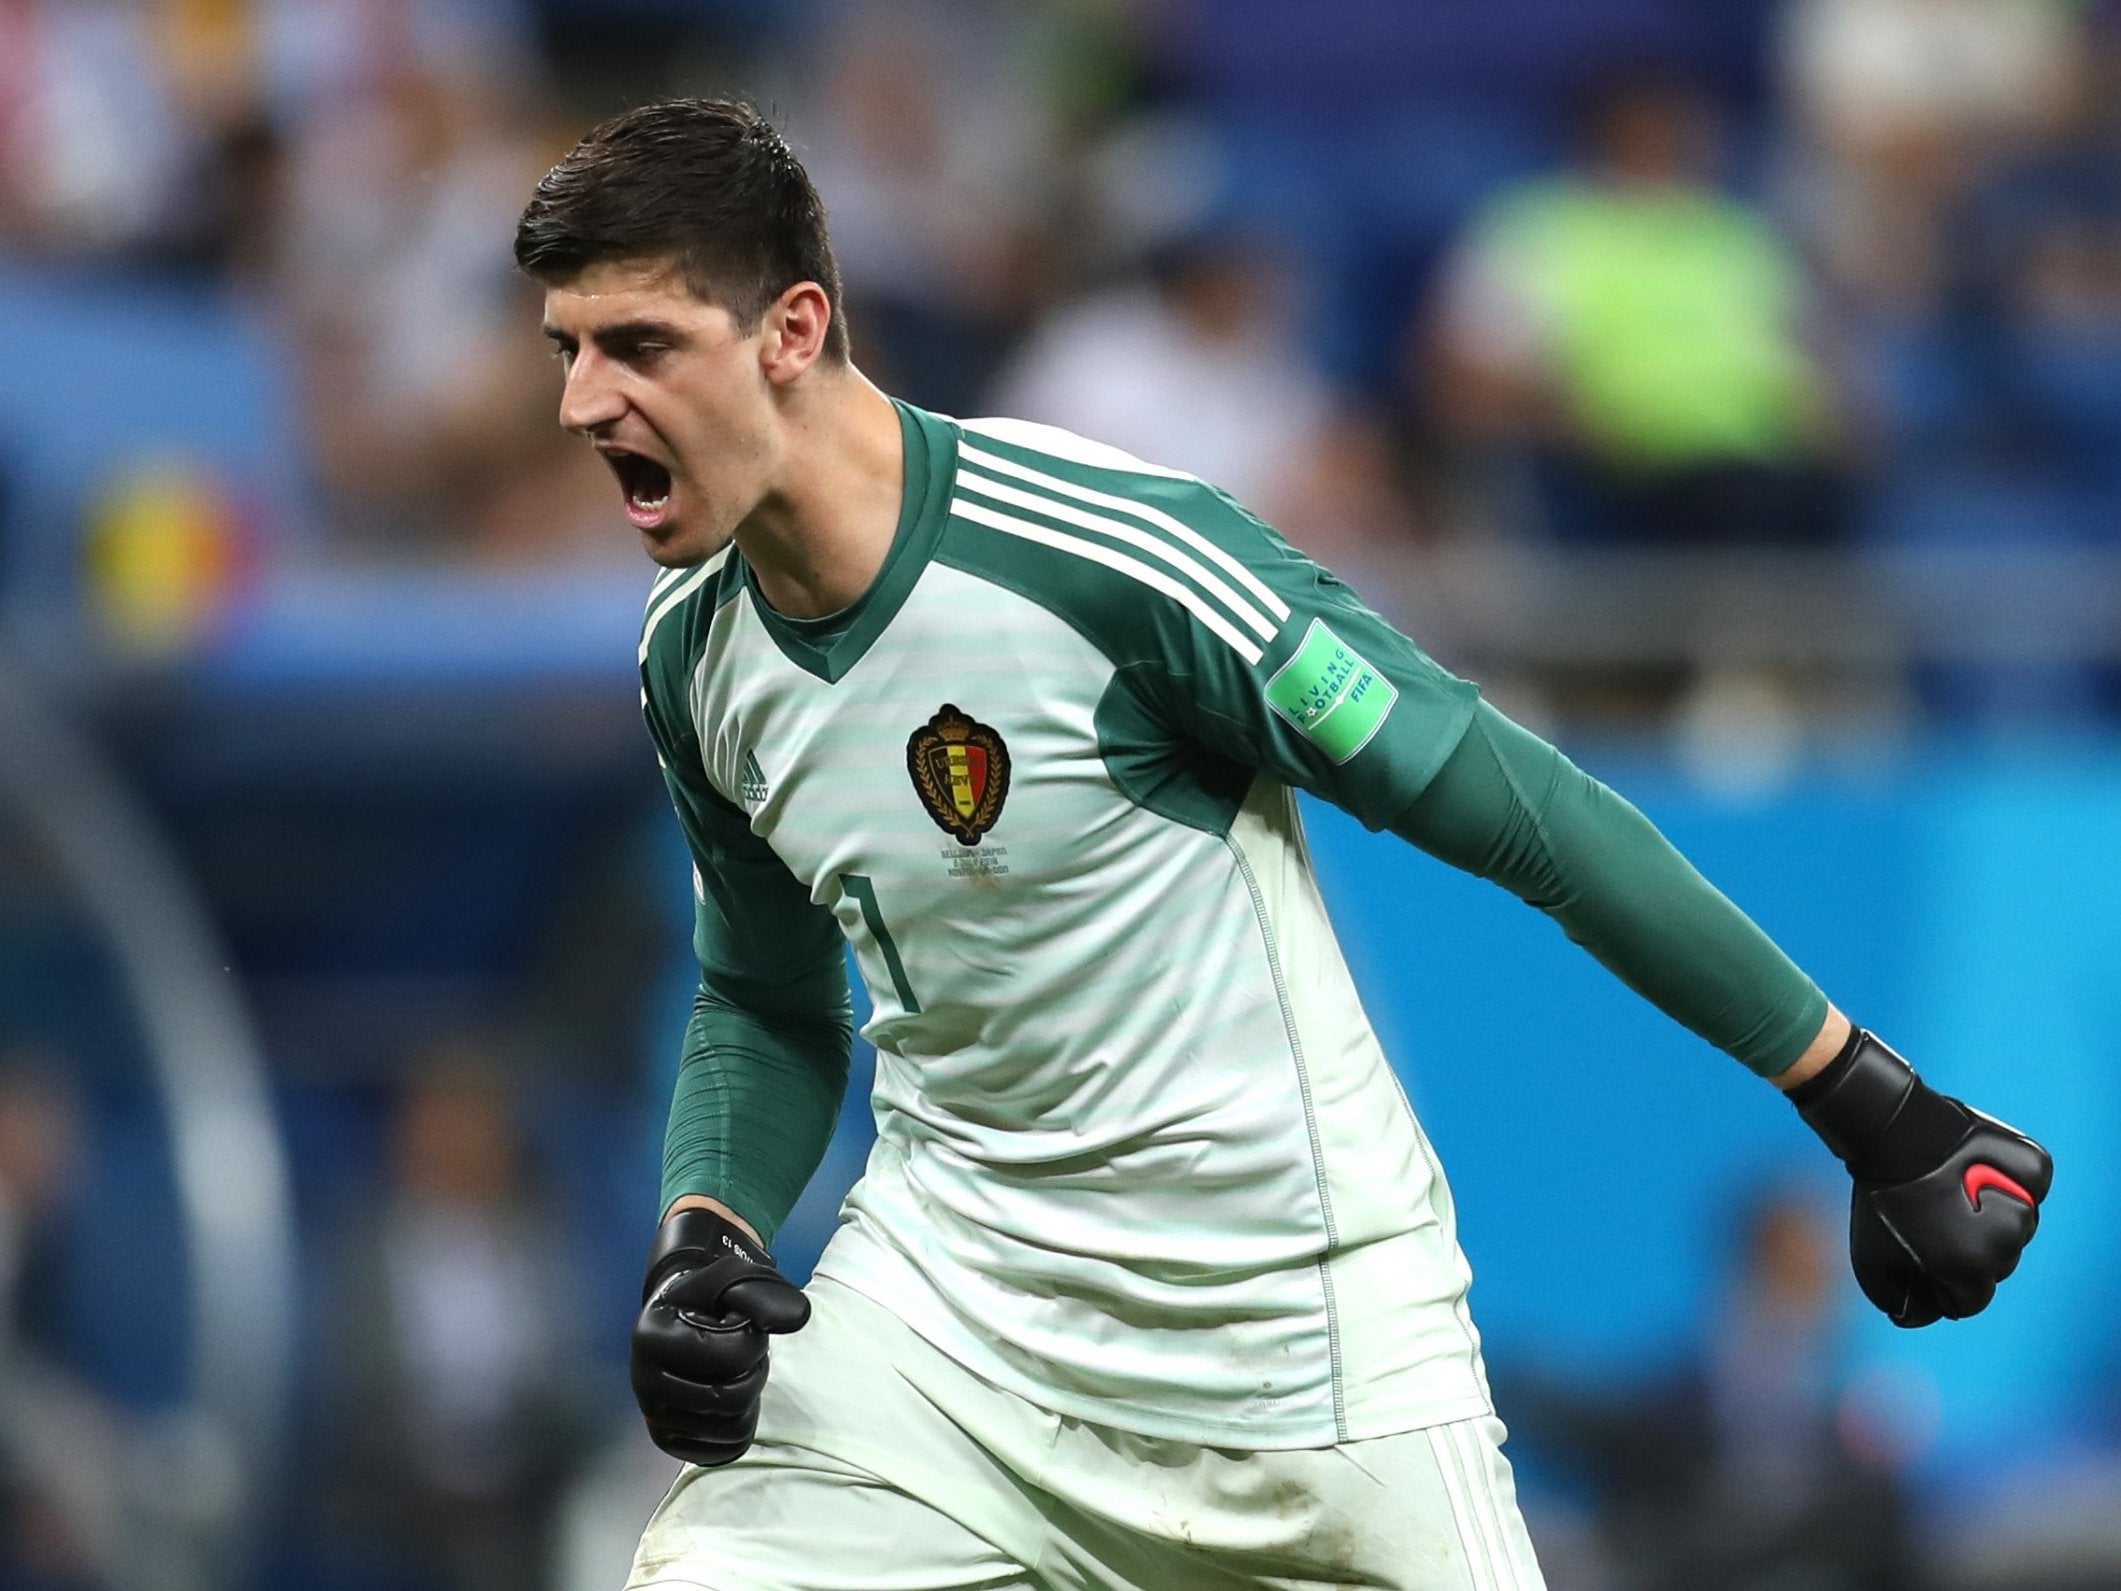 Courtois has remained coy on his Chelsea future as he eyes a move back to Madrid